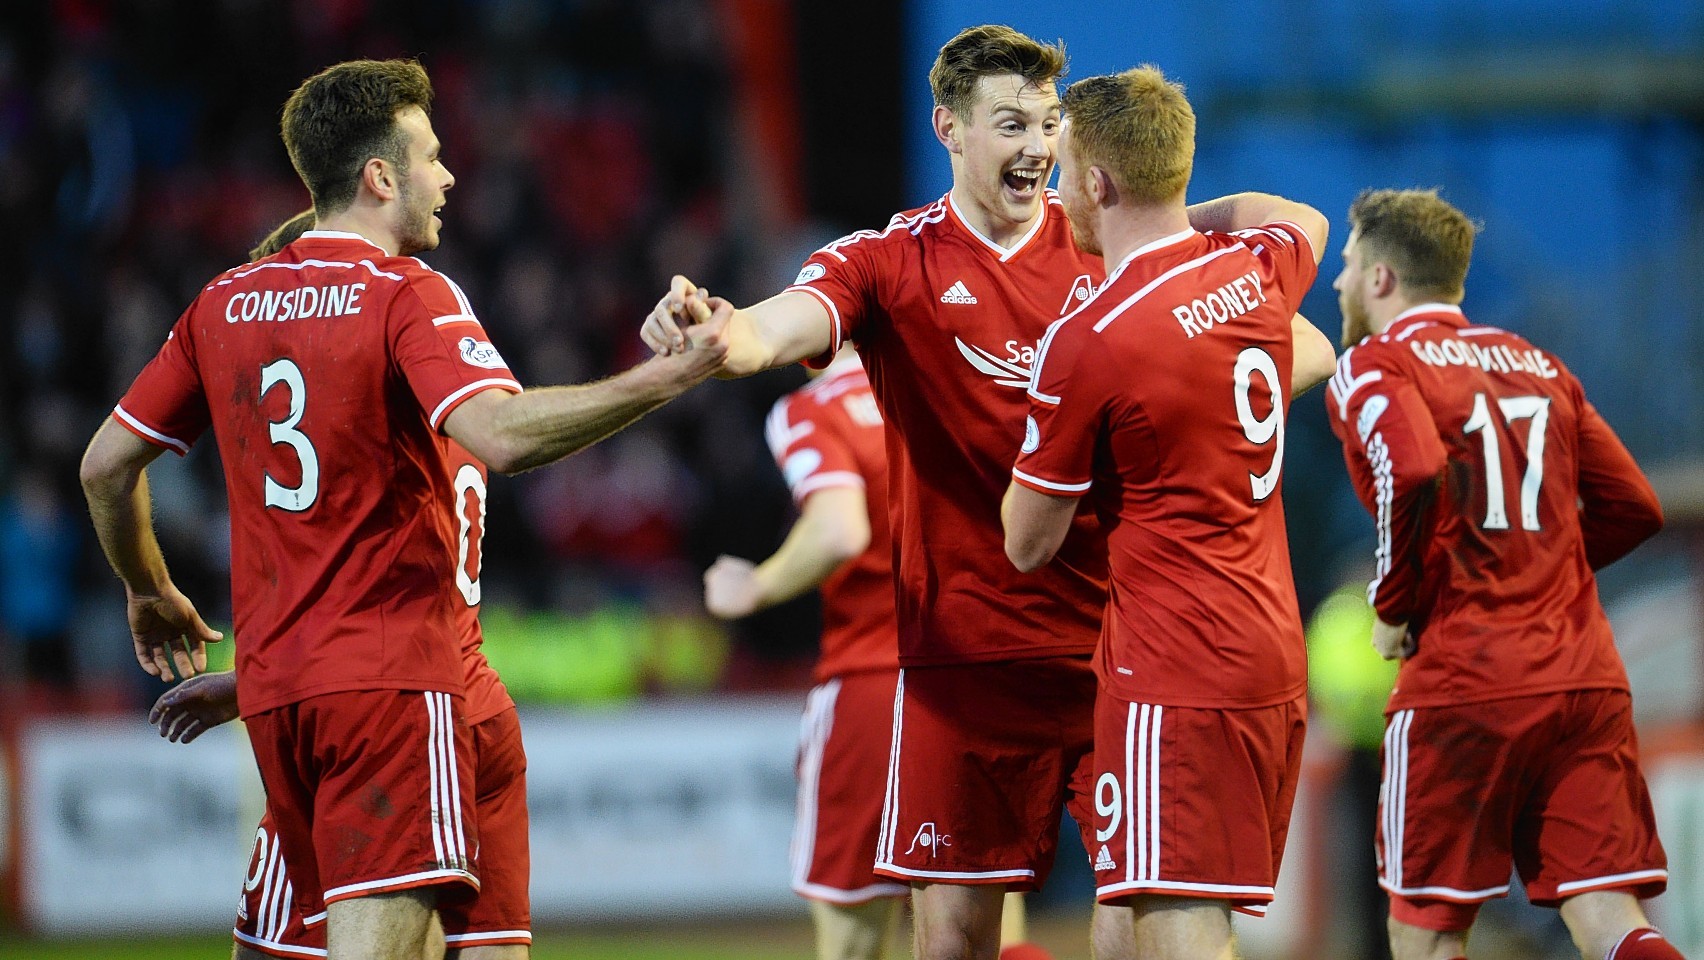 Ash Taylor celebrates his opening goal with Andrew Considine, Adam Rooney and David Goodwillie.